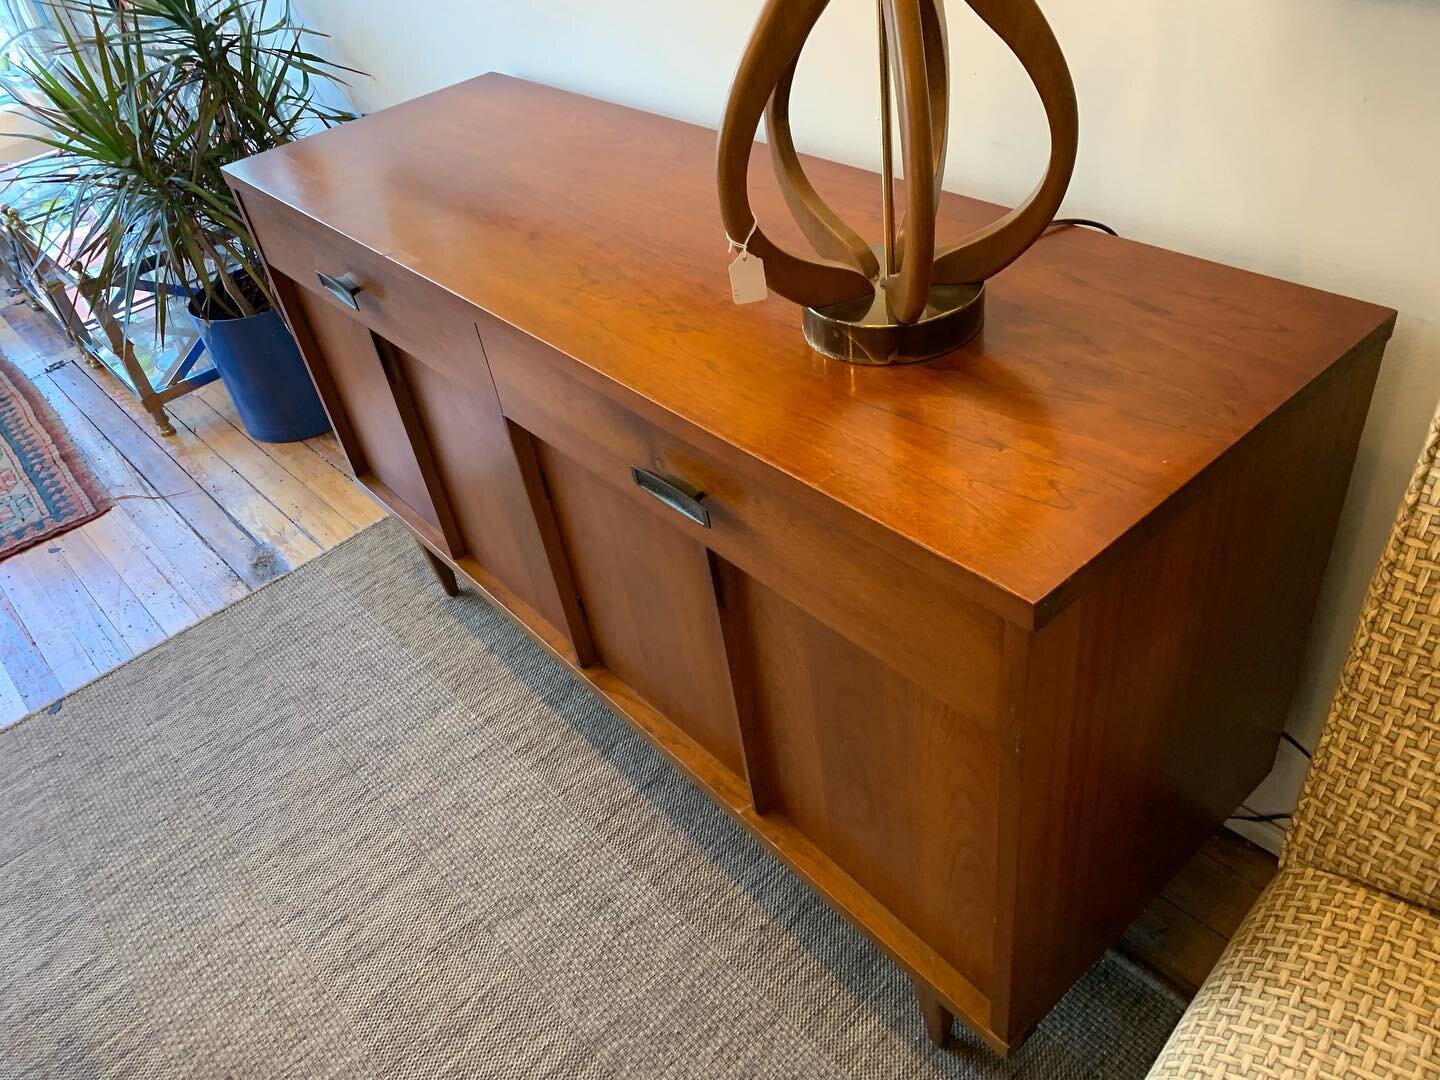 -Sold -A handsome American walnut credenza fresh into the shop. Great compact size, 56&rdquo; long, 18-1/4&rdquo; deep, 31&rdquo; tall. $495. #mcmdesign #vintagedesign #flx #genevany #interiordesign #mcmcredenza #morganlaurent